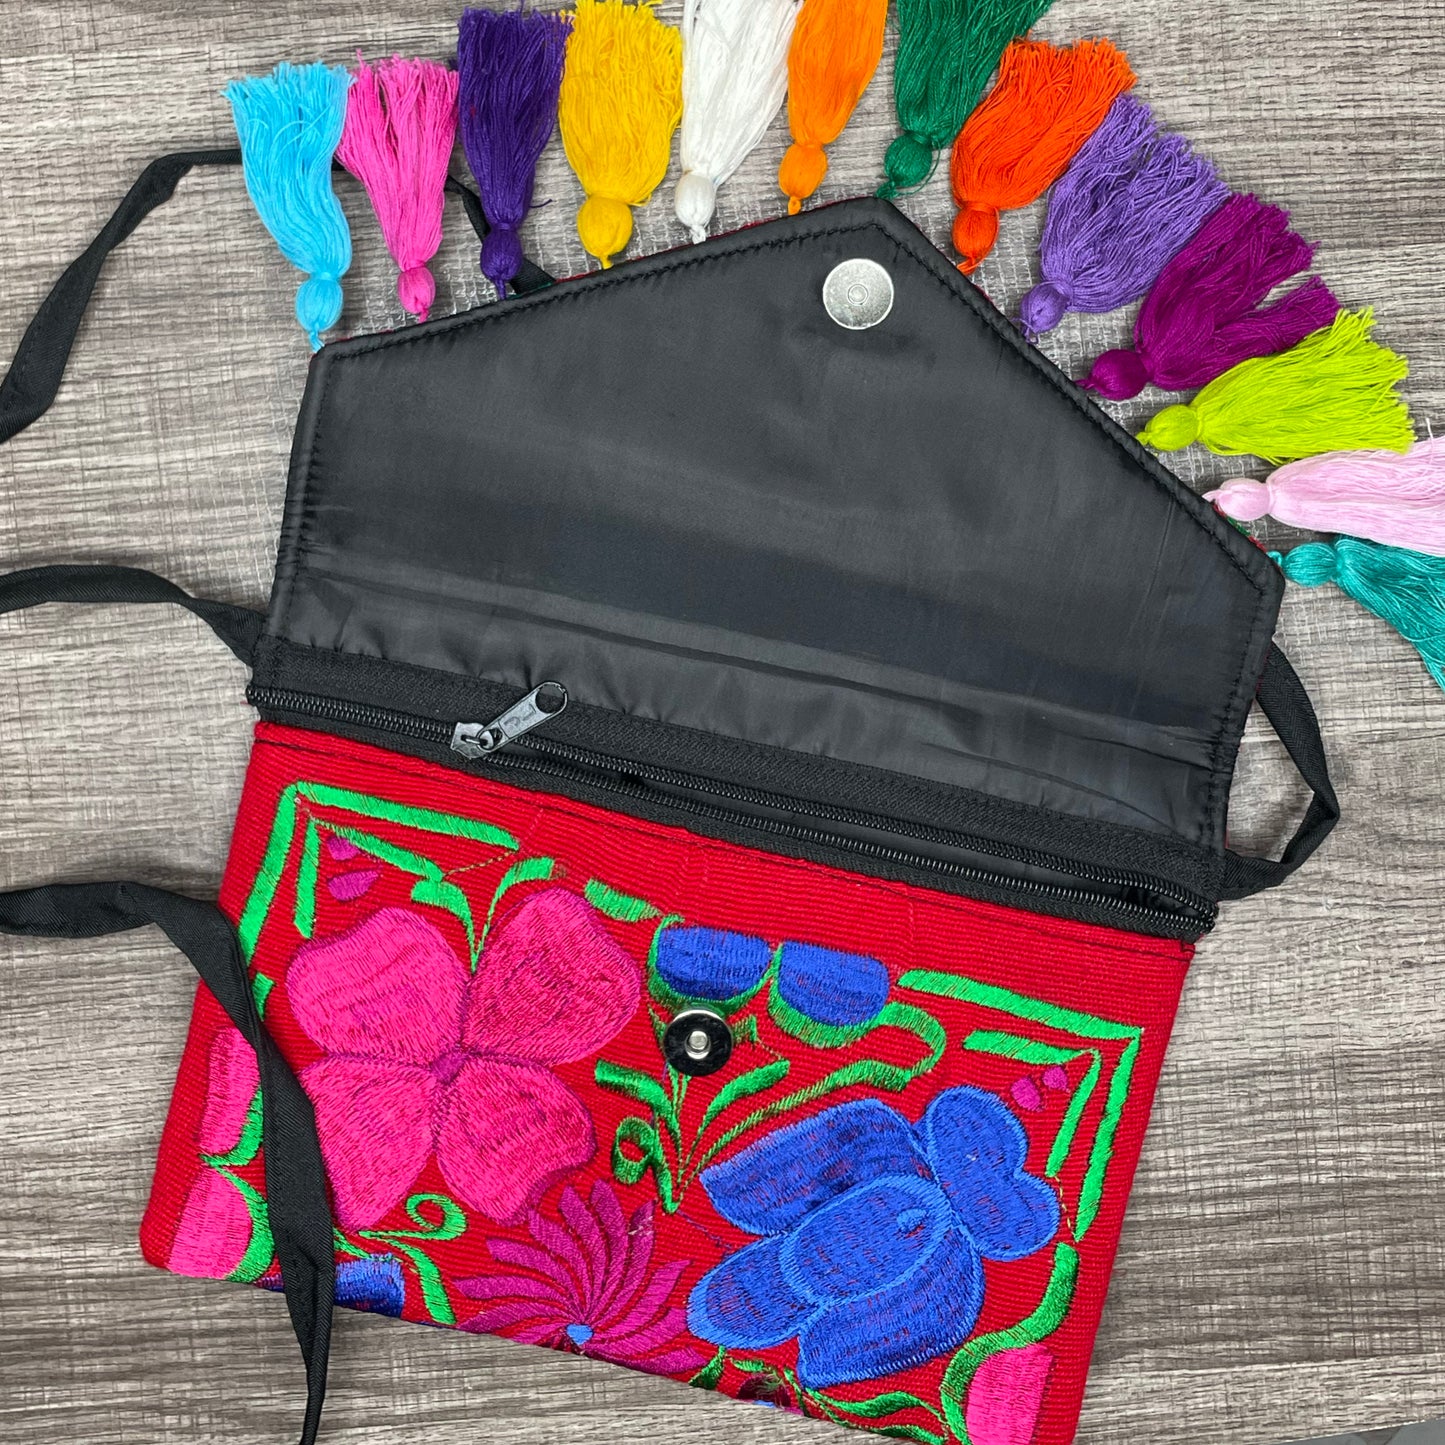 Mexican Embroidered Clutch - Crossbody Zinnia